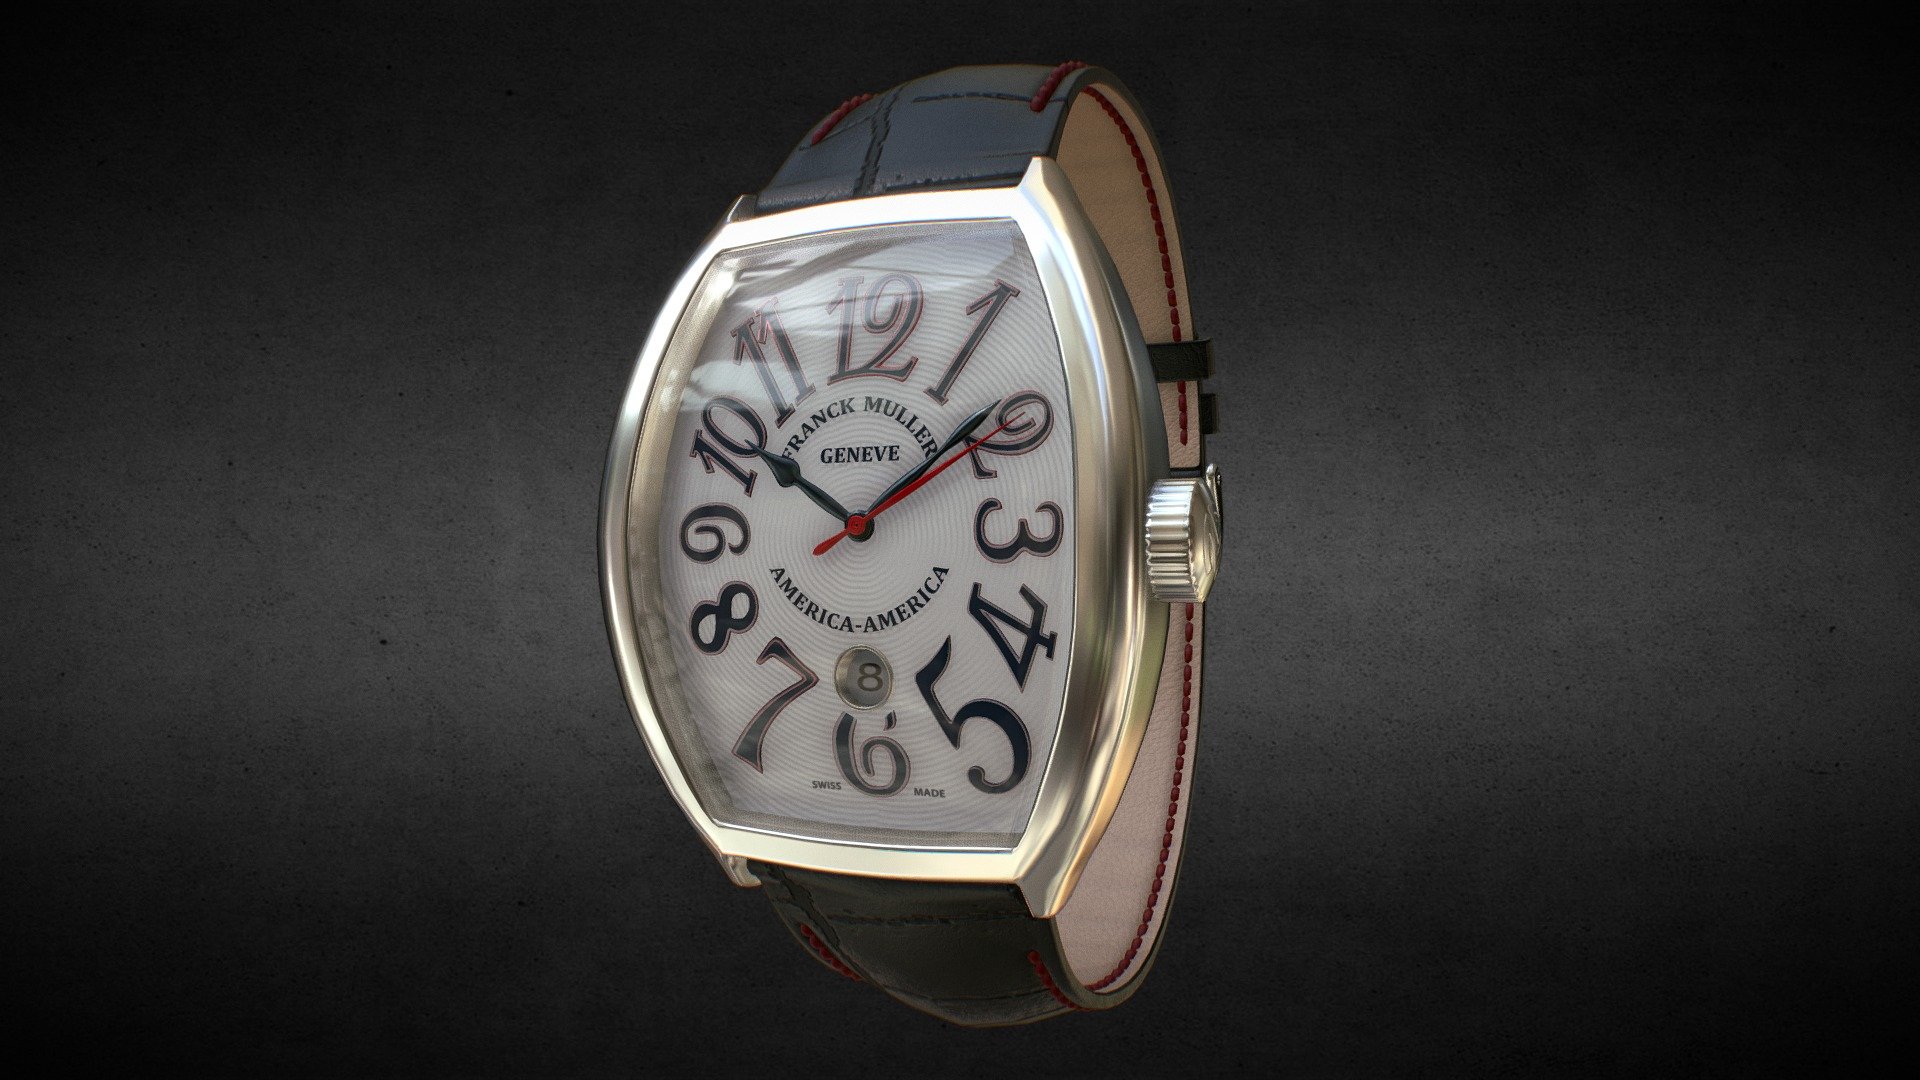 Awesome stainless steel FS- Franck Muller 8880 America  Watch with leather strap.
Use for Unreal Engine 4 and Unity3D. Try in augmented reality in the AR-Watches app. 
Links to the app: Android, iOS

Currently available for download in dae format.

3D model developed by AR-Watches

Disclaimer: We do not own the design of the watch, we only made the 3D model 3d model